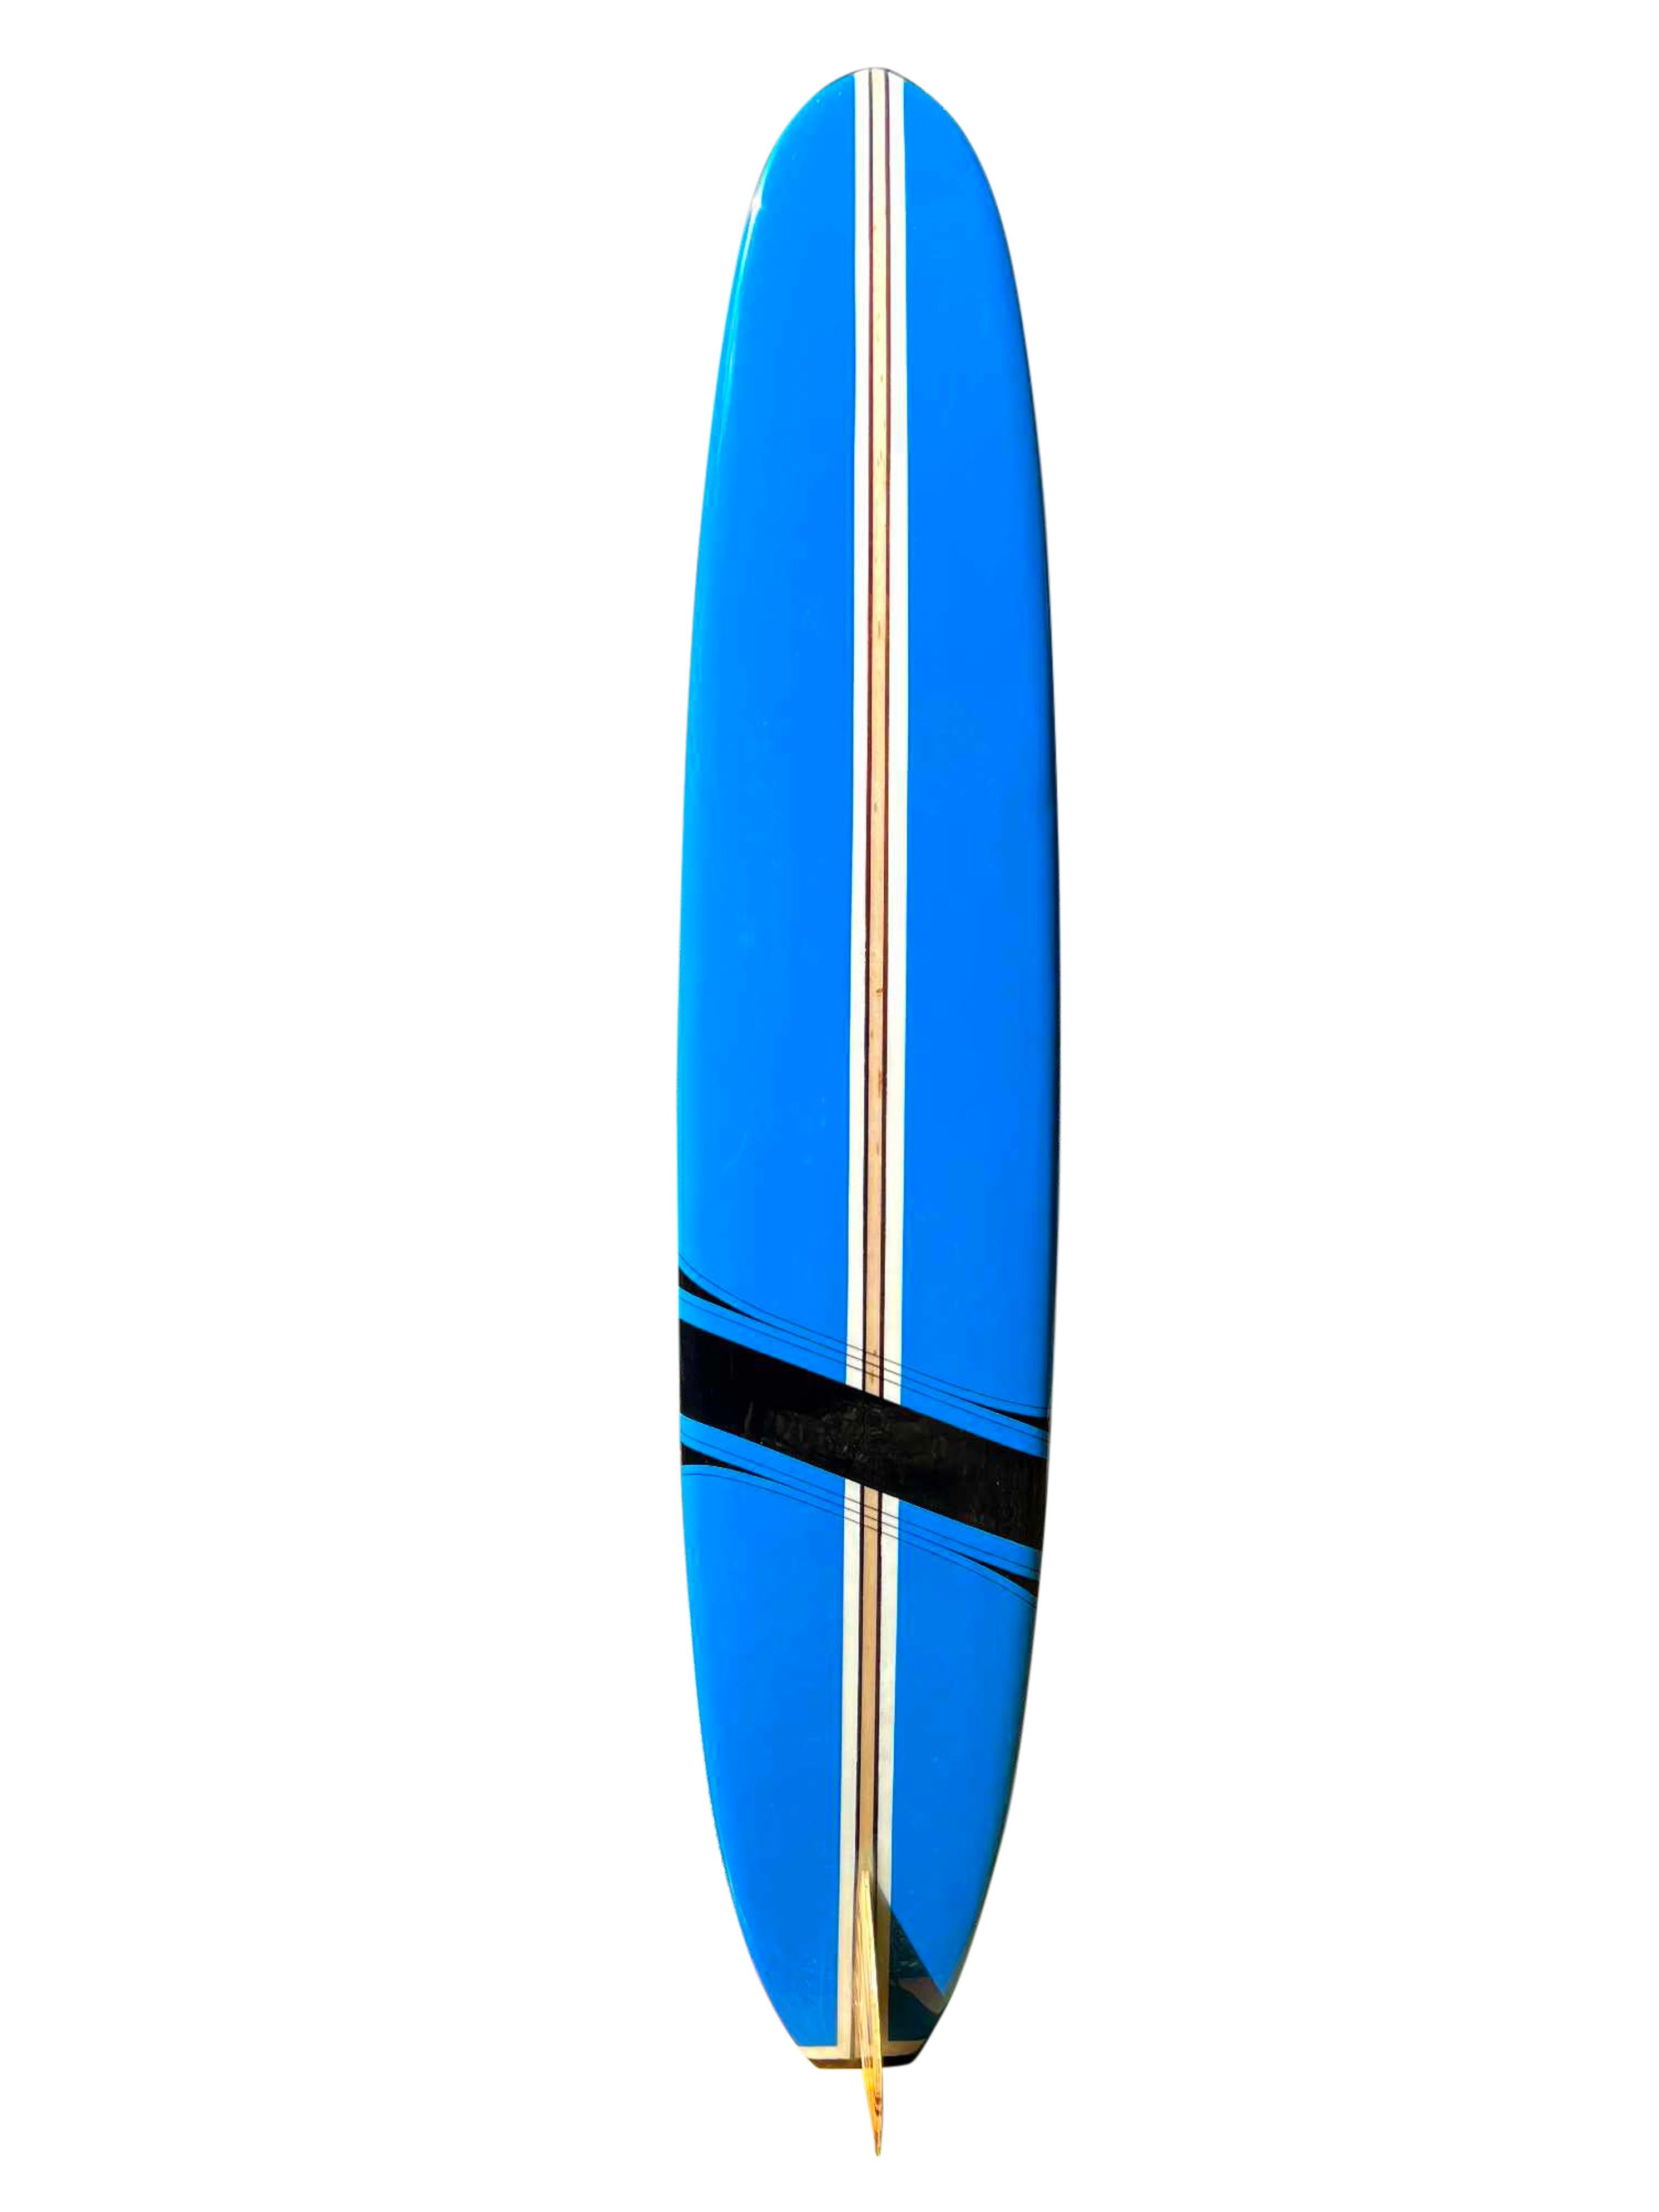 Early-1960s Hobie competition longboard surfboard. Features beautiful blue panels with jet-black competition band and matching pinstriping. Intricate 17 piece wooden fin with wide square-tail. A gorgeous example of a competition Hobie longboard